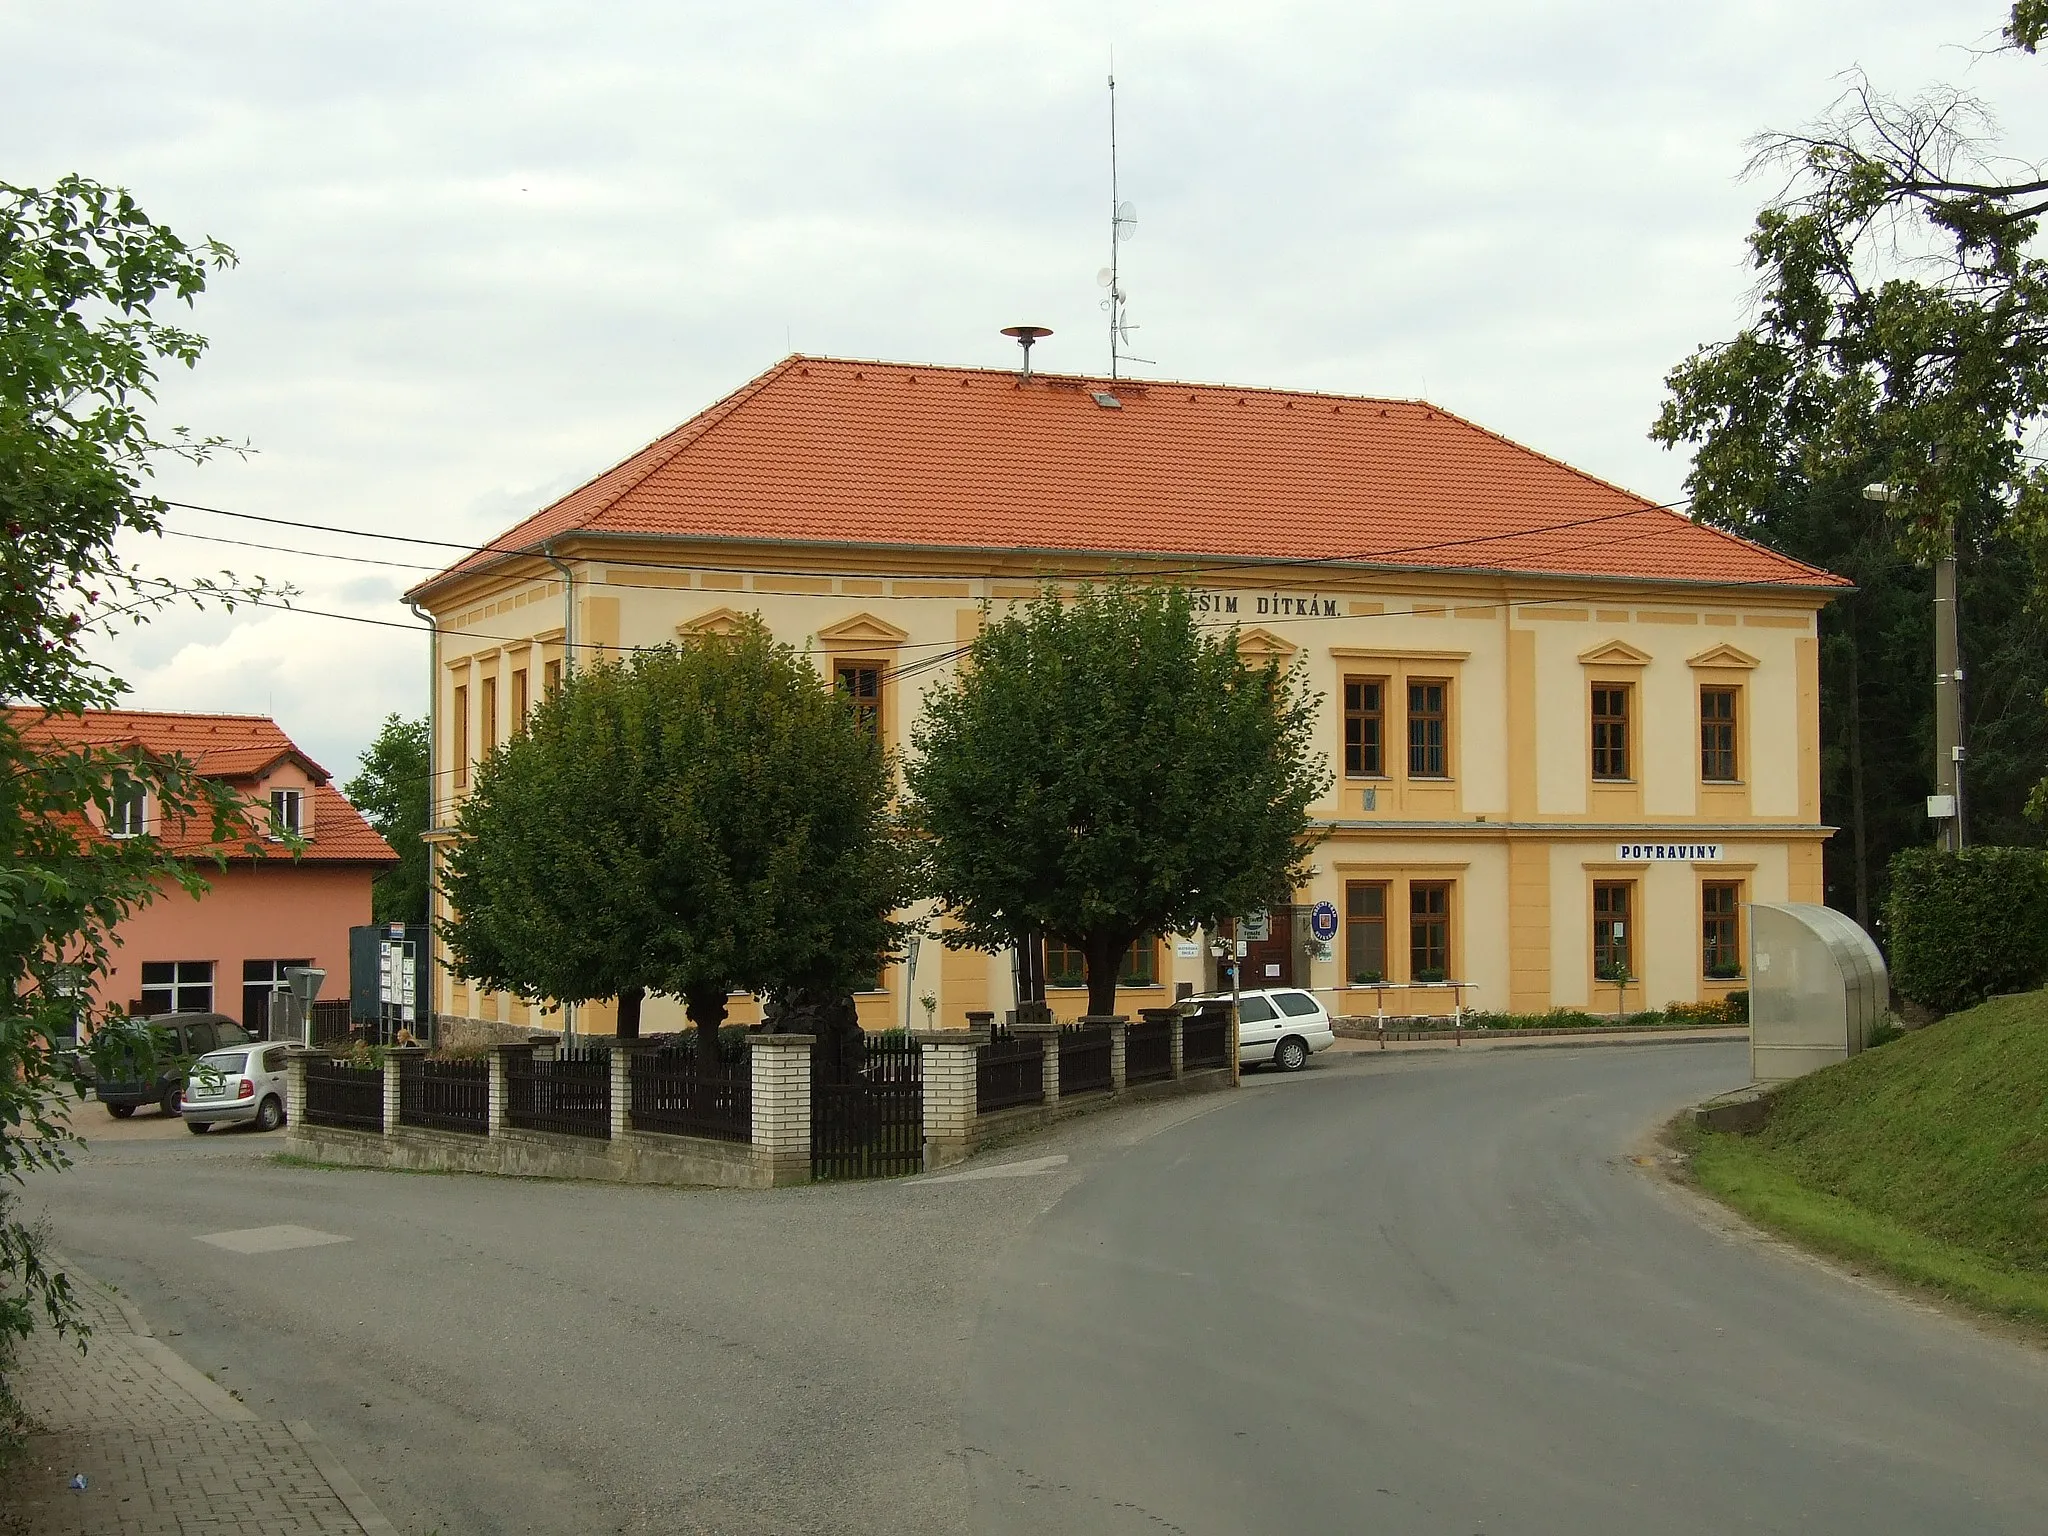 Photo showing: A school in the town of Svinaře - Beroun District, Central Bohemian Region, CZ